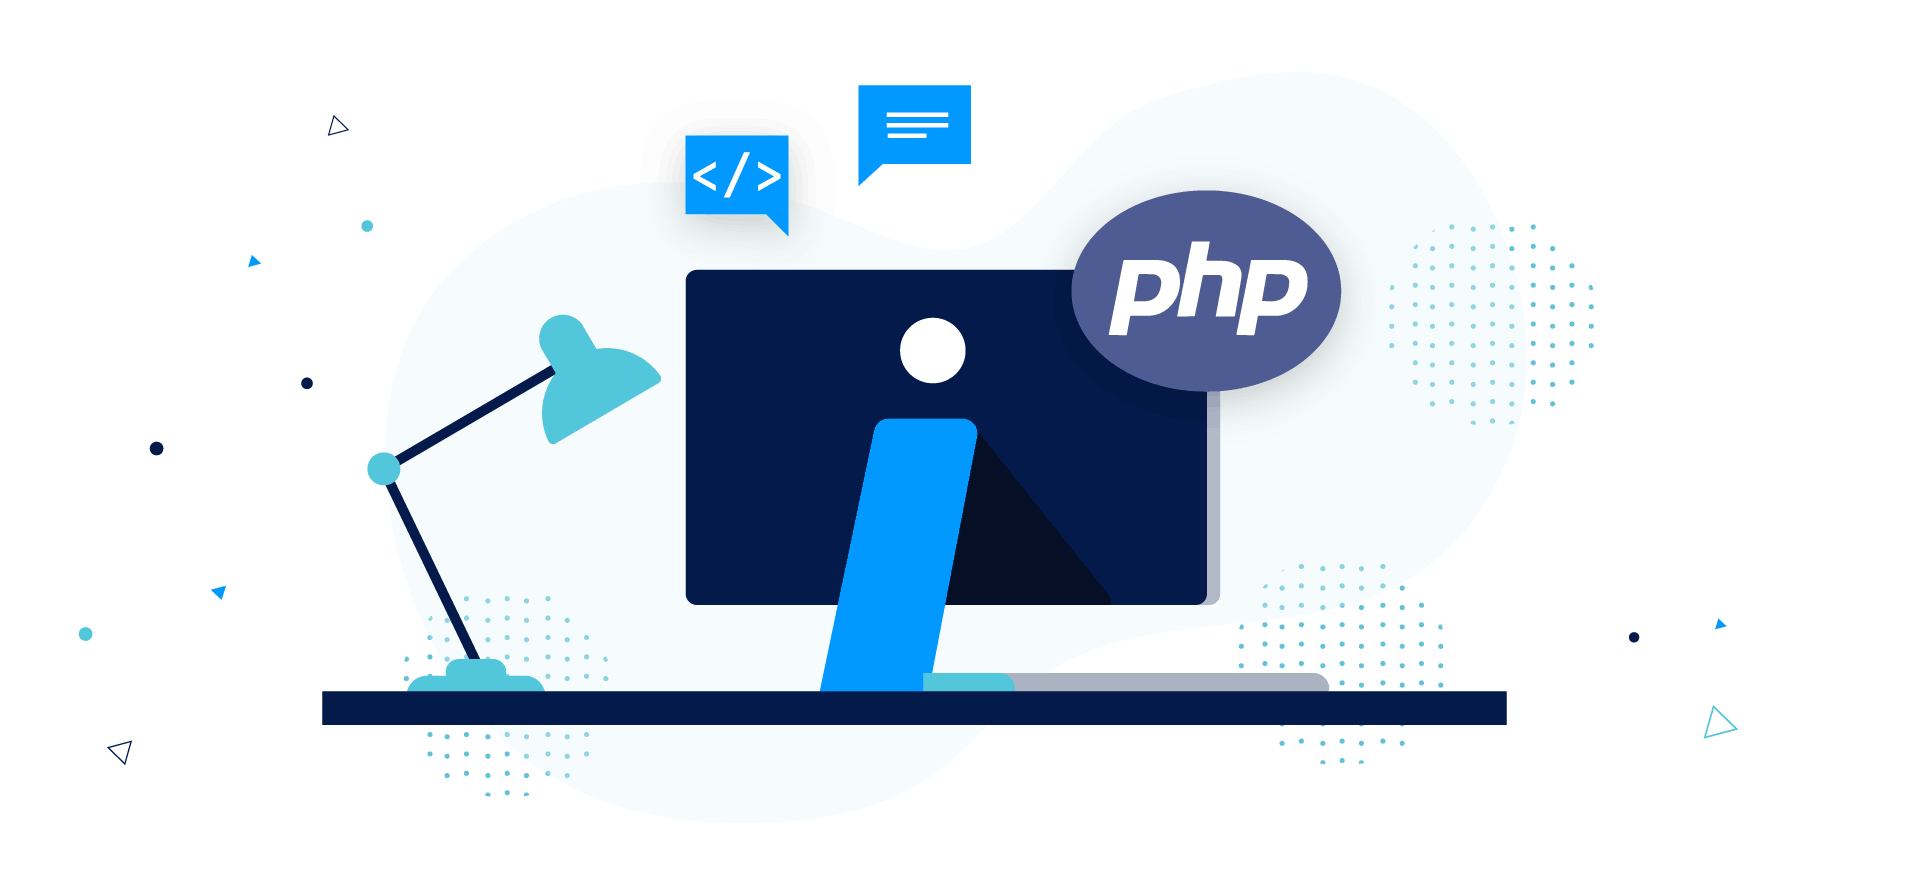 PHP is alive – long live PHP!